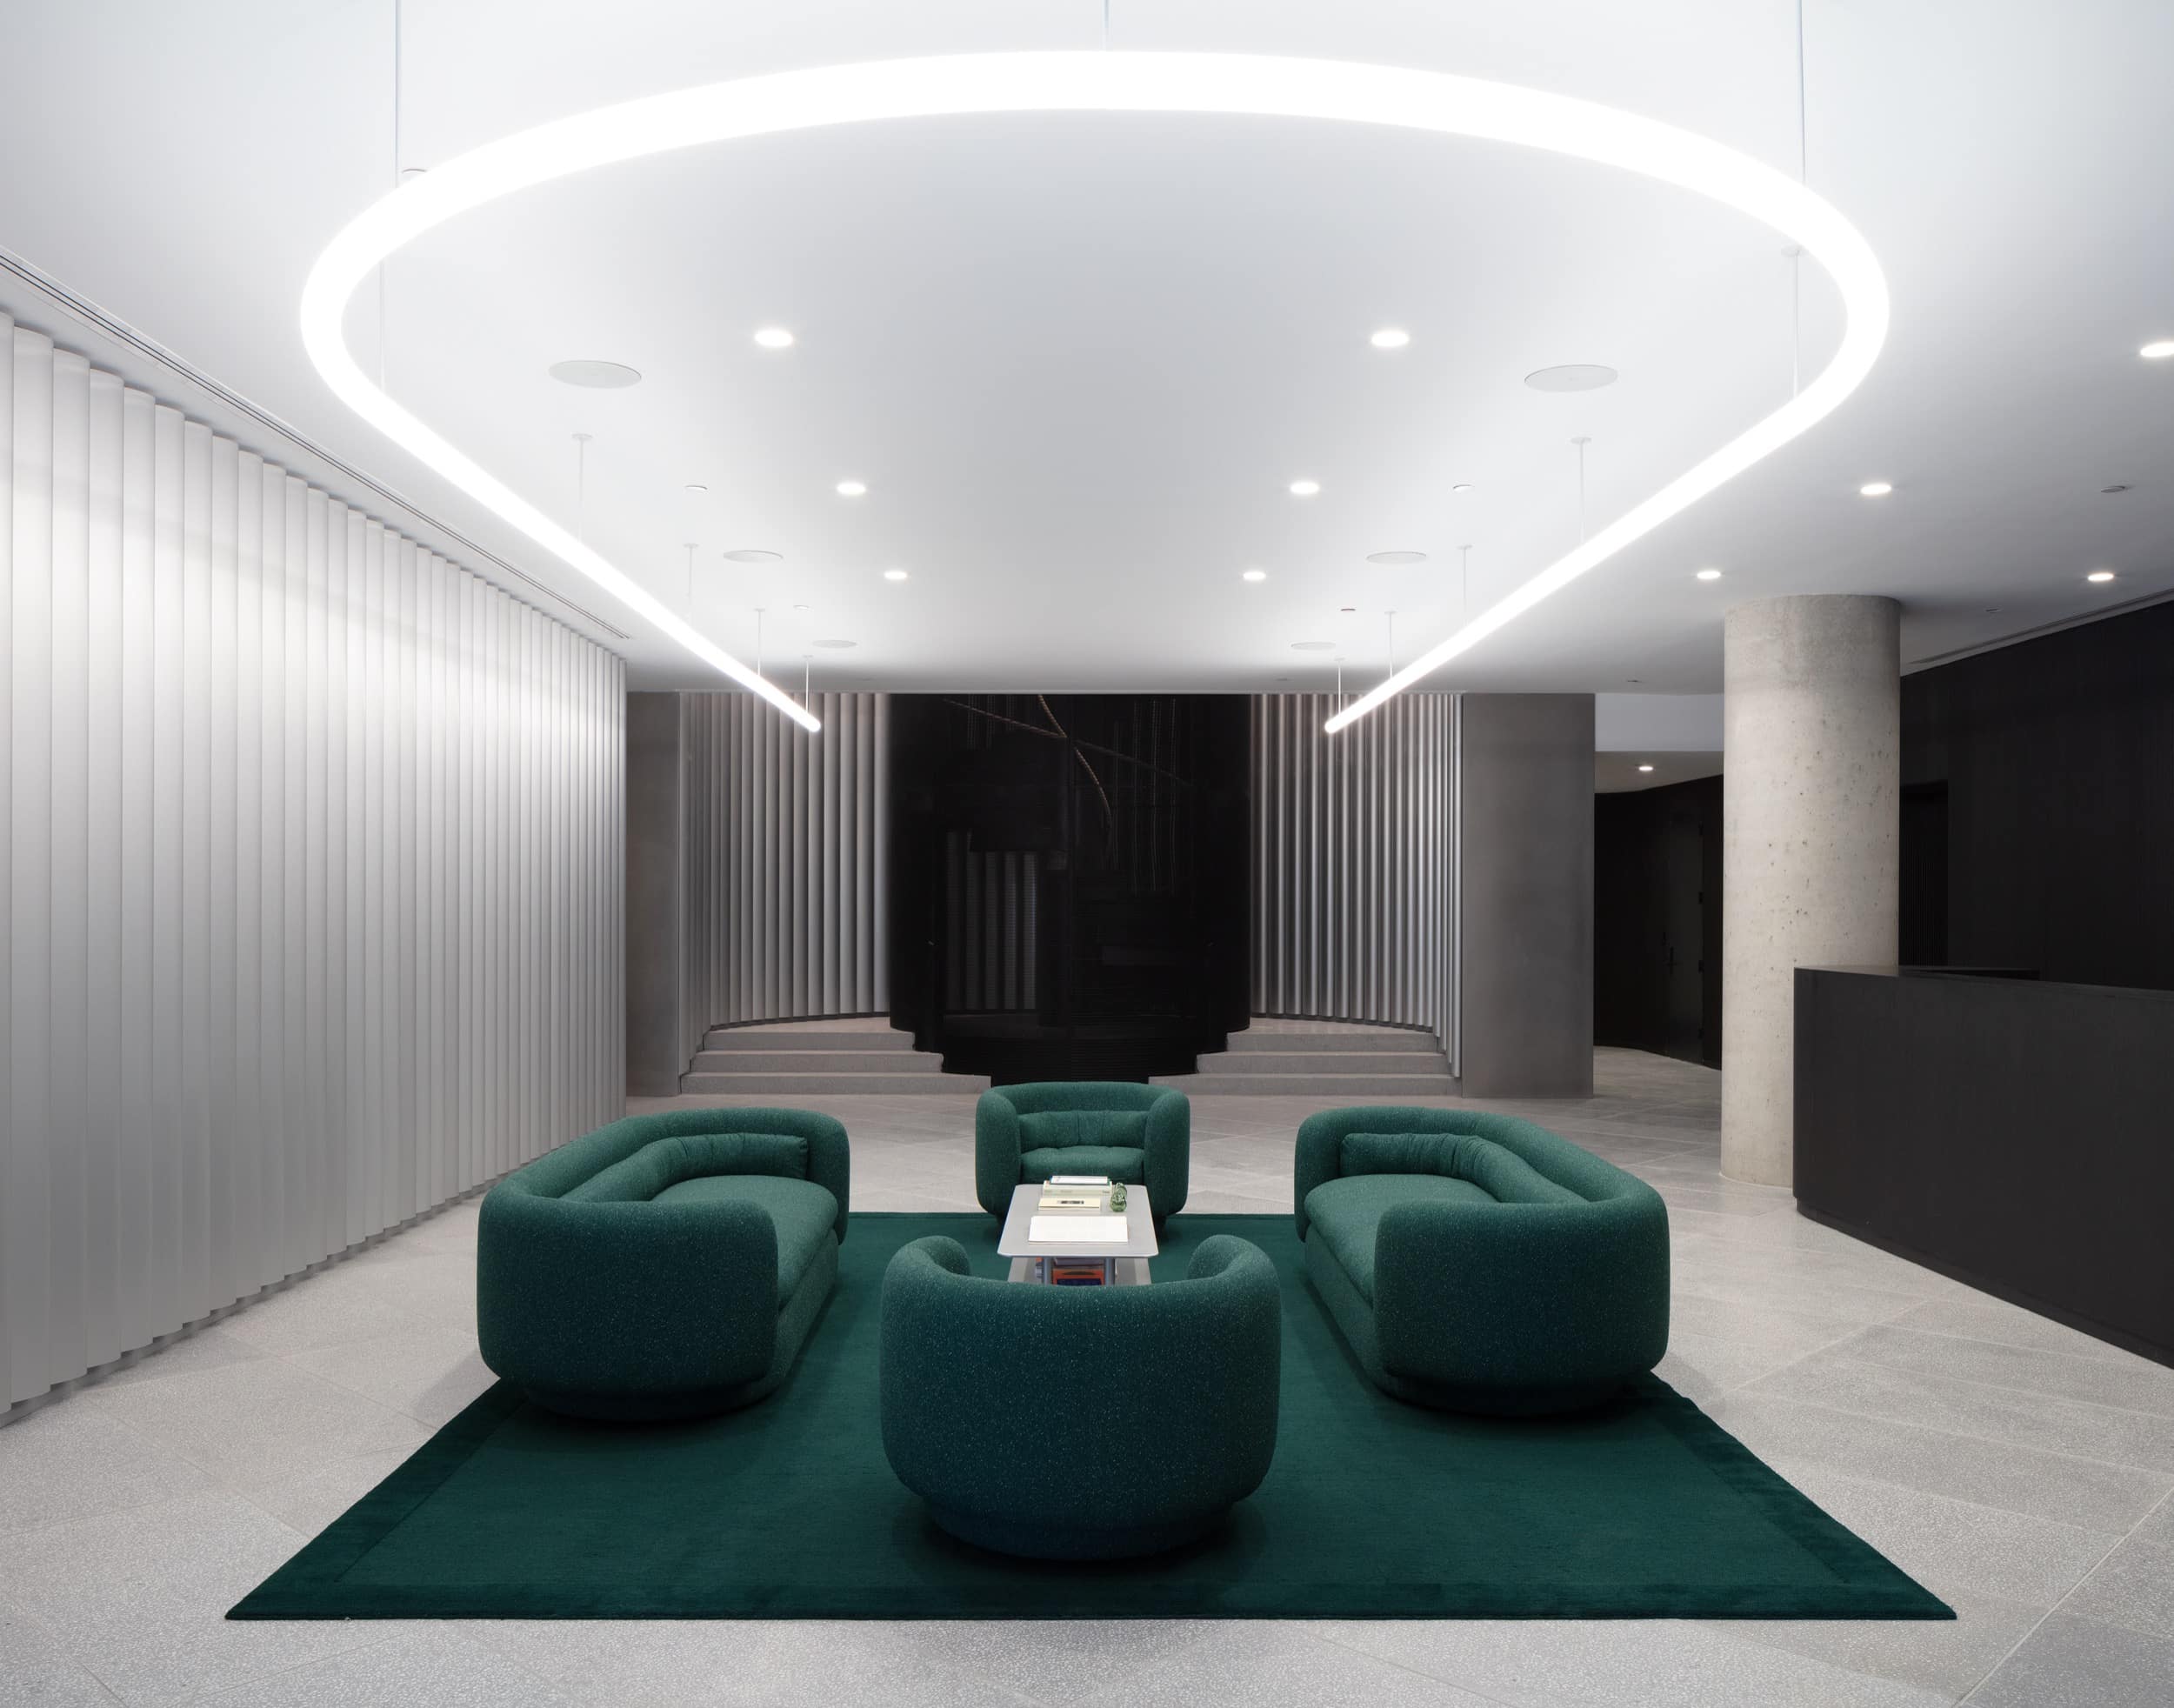 The Leong Leong-designed lobby features curving, extruded aluminum metal walls.